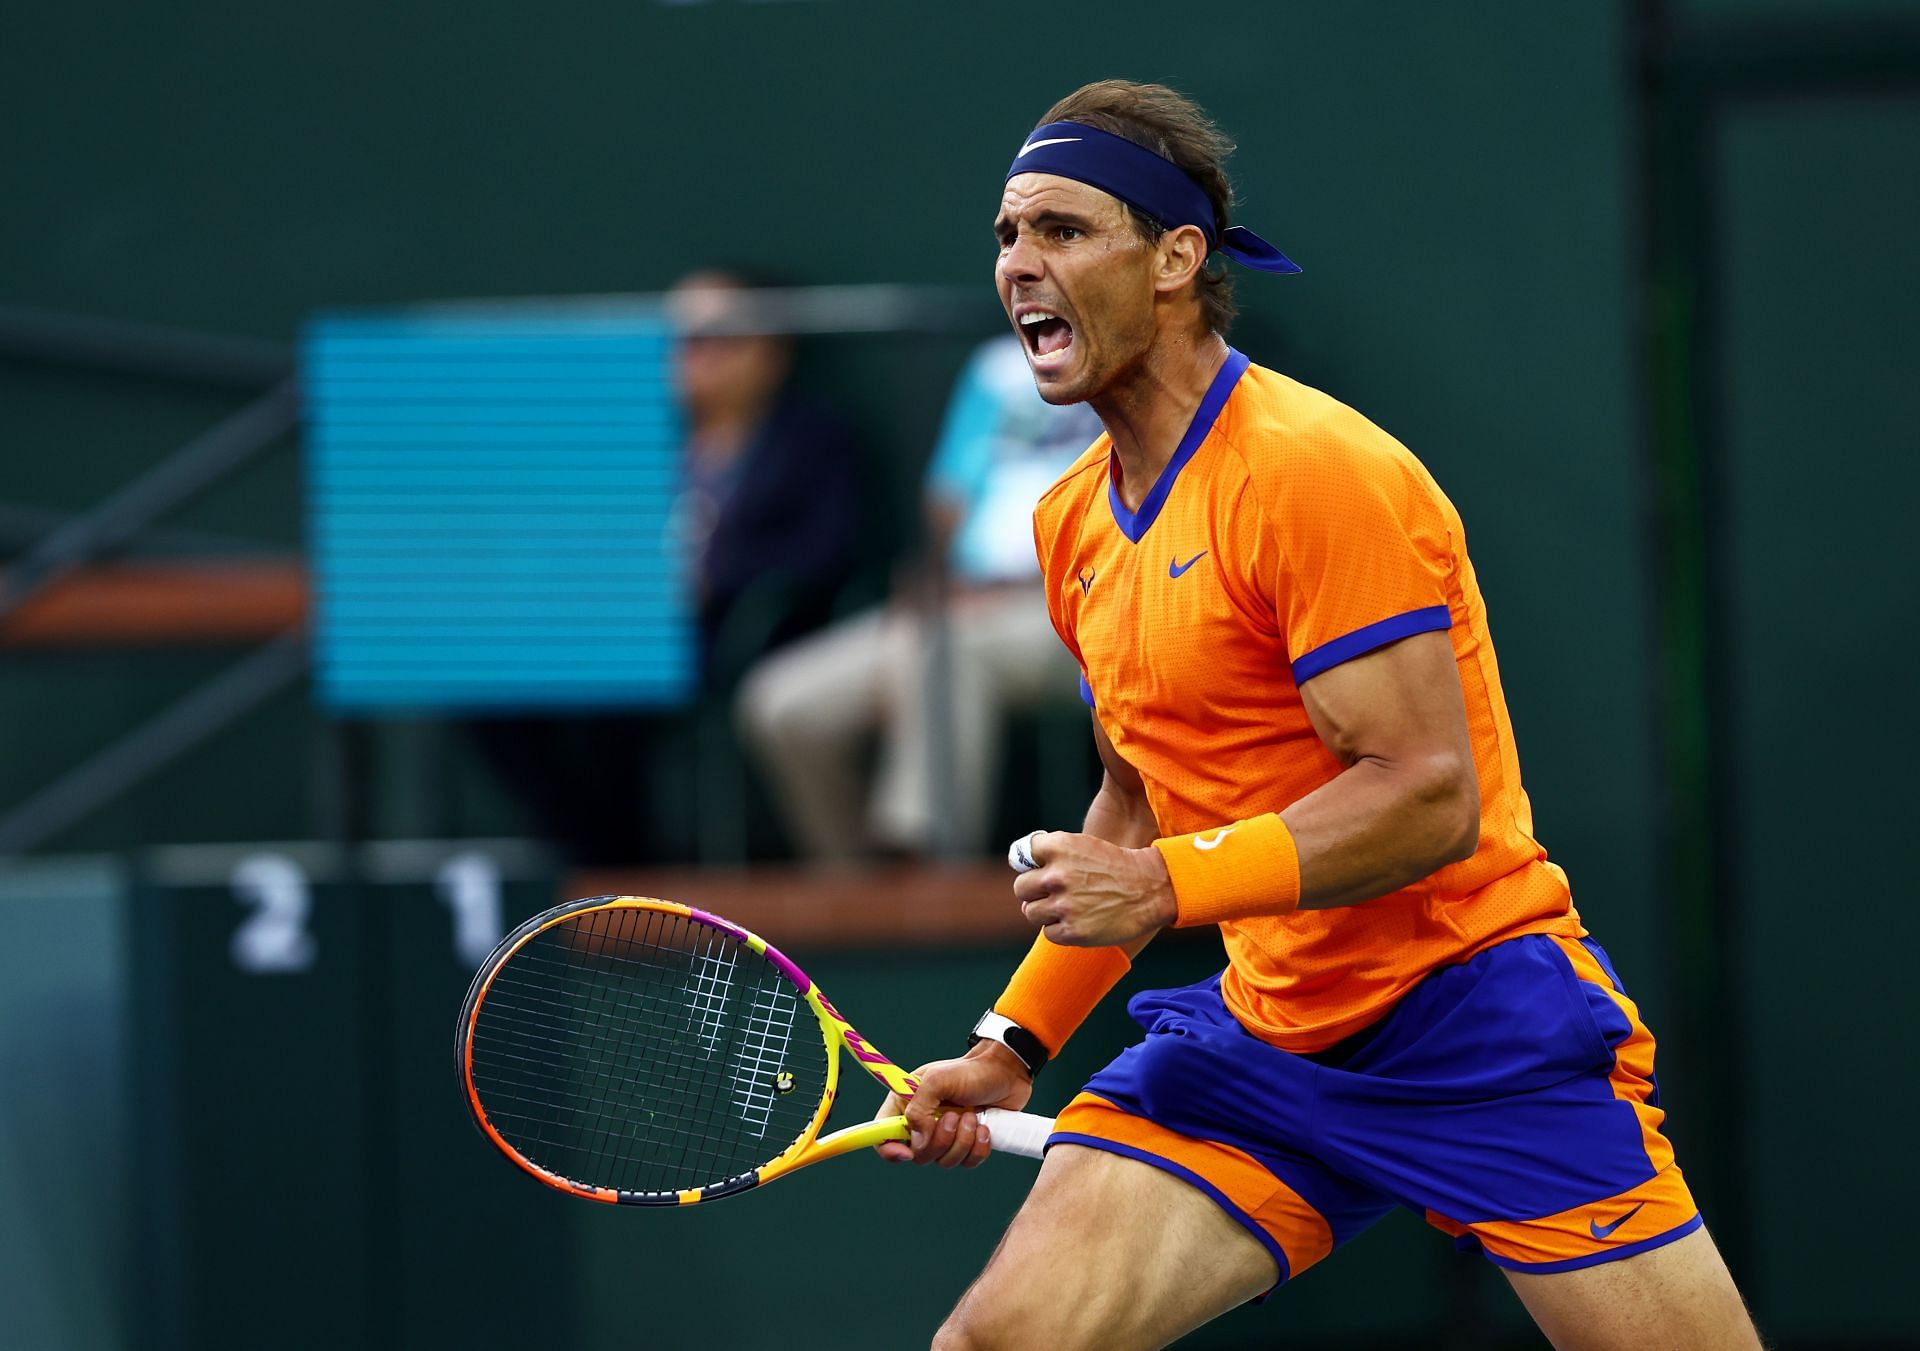 Indian Wells 2022 Final, Rafael Nadal vs Taylor Fritz Where to watch, TV schedule, Live stream details and more BNP Paribas Open